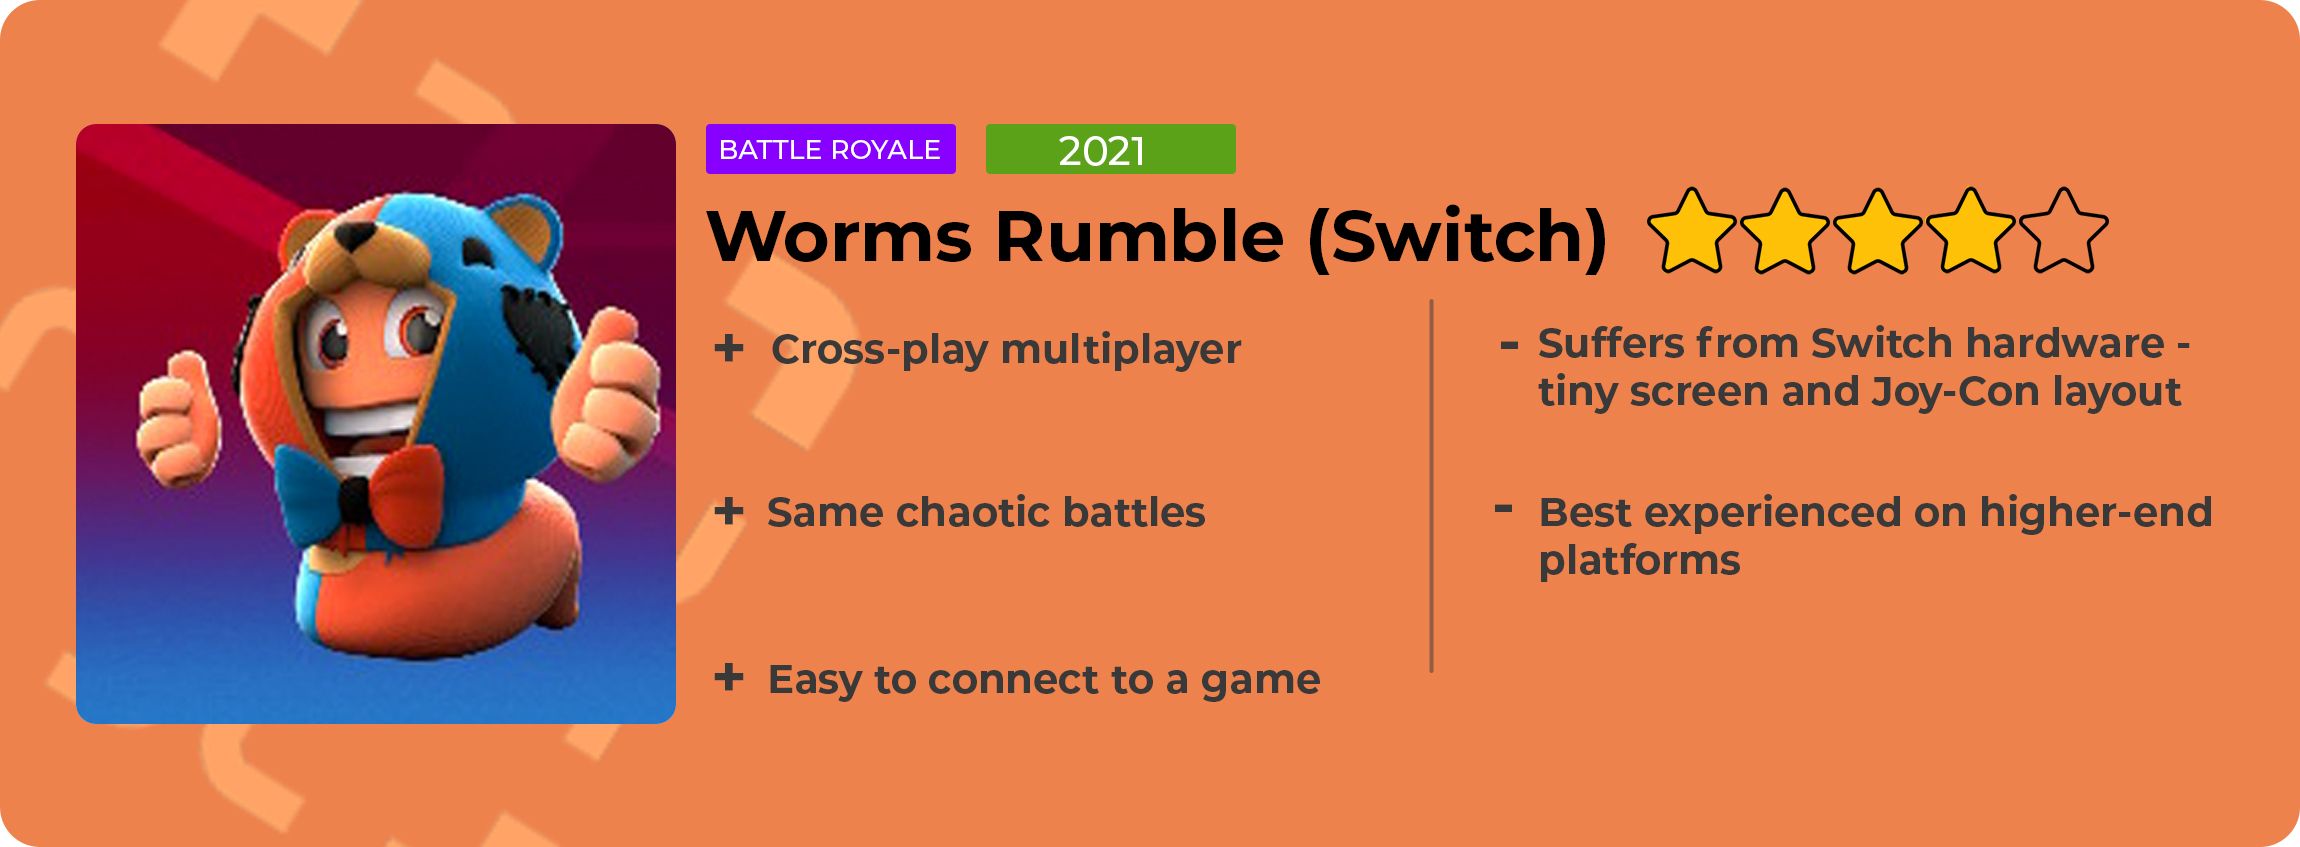 Worms Rumble Switch Rating